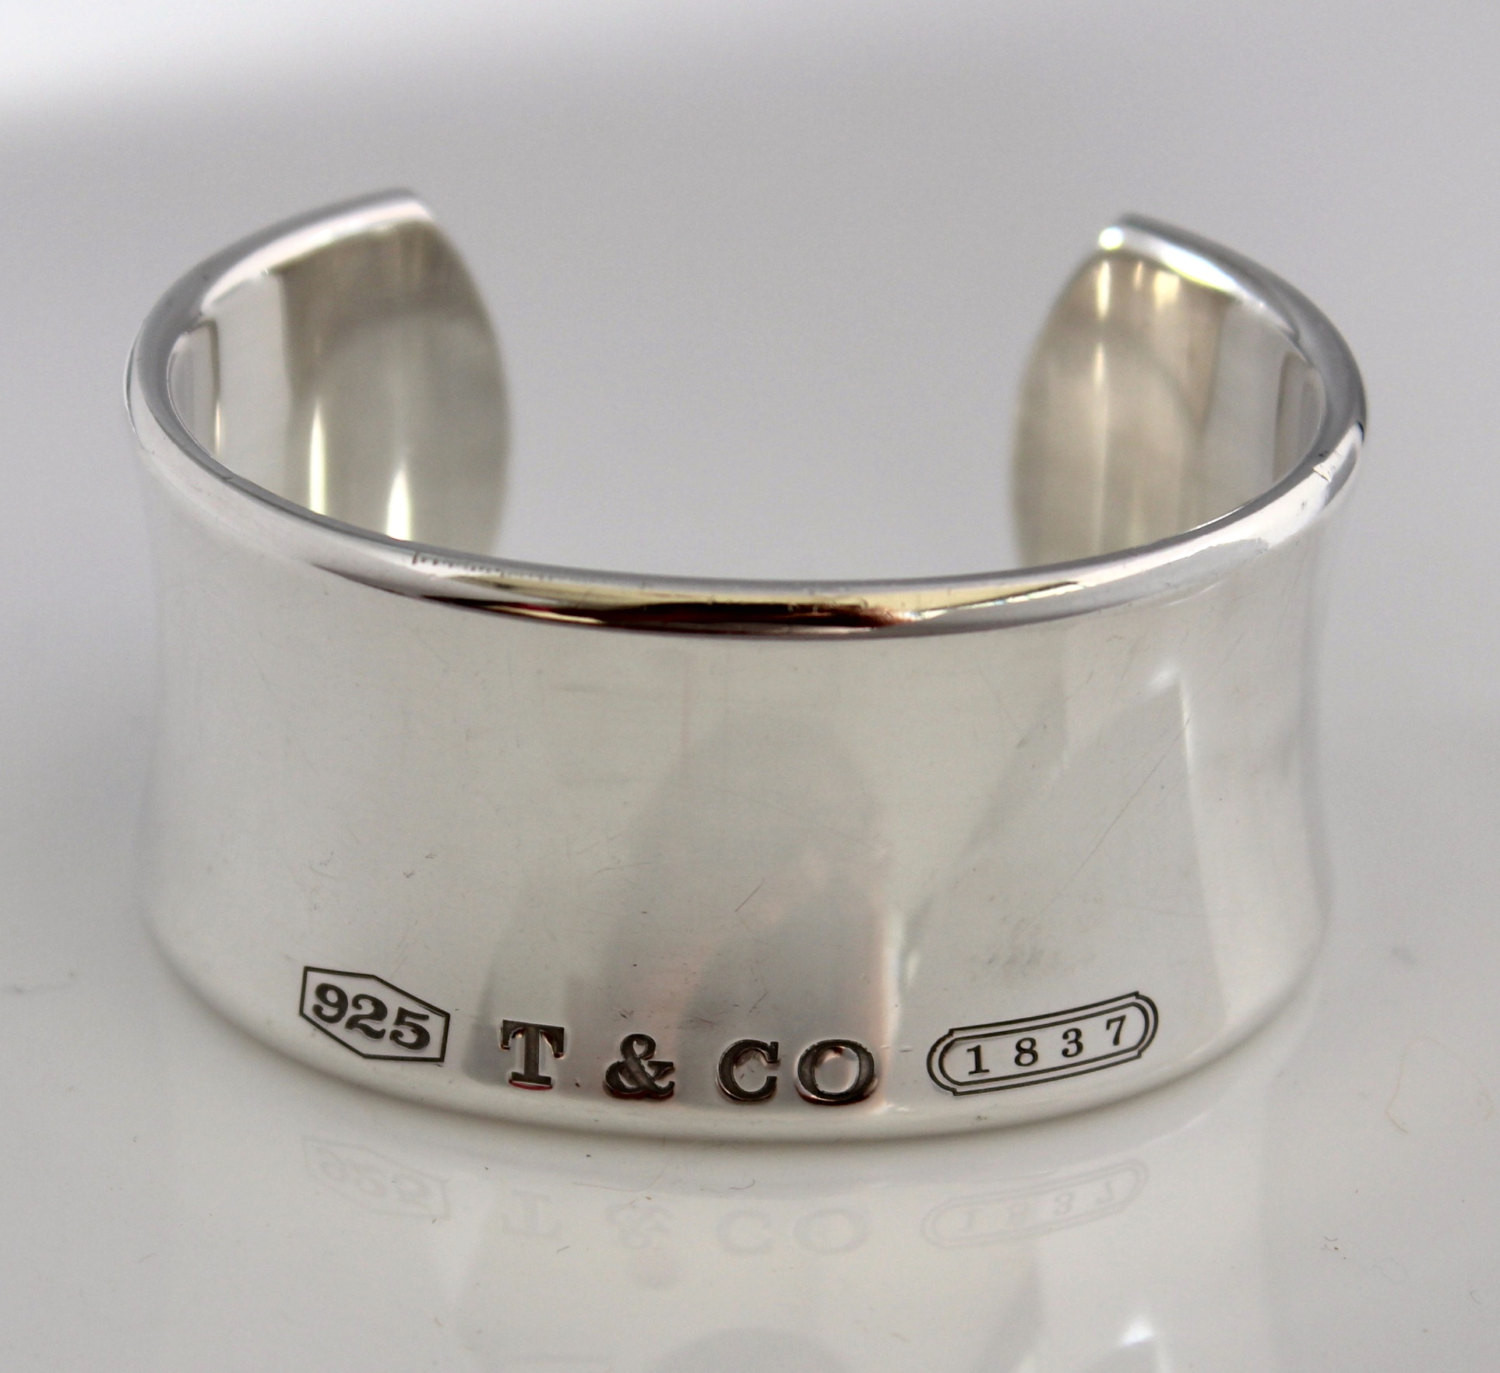 Tiffany And Co Bracelet 925
 Tiffany and Co Silver Bracelet 925 T & Co 1837 Wide Cuff